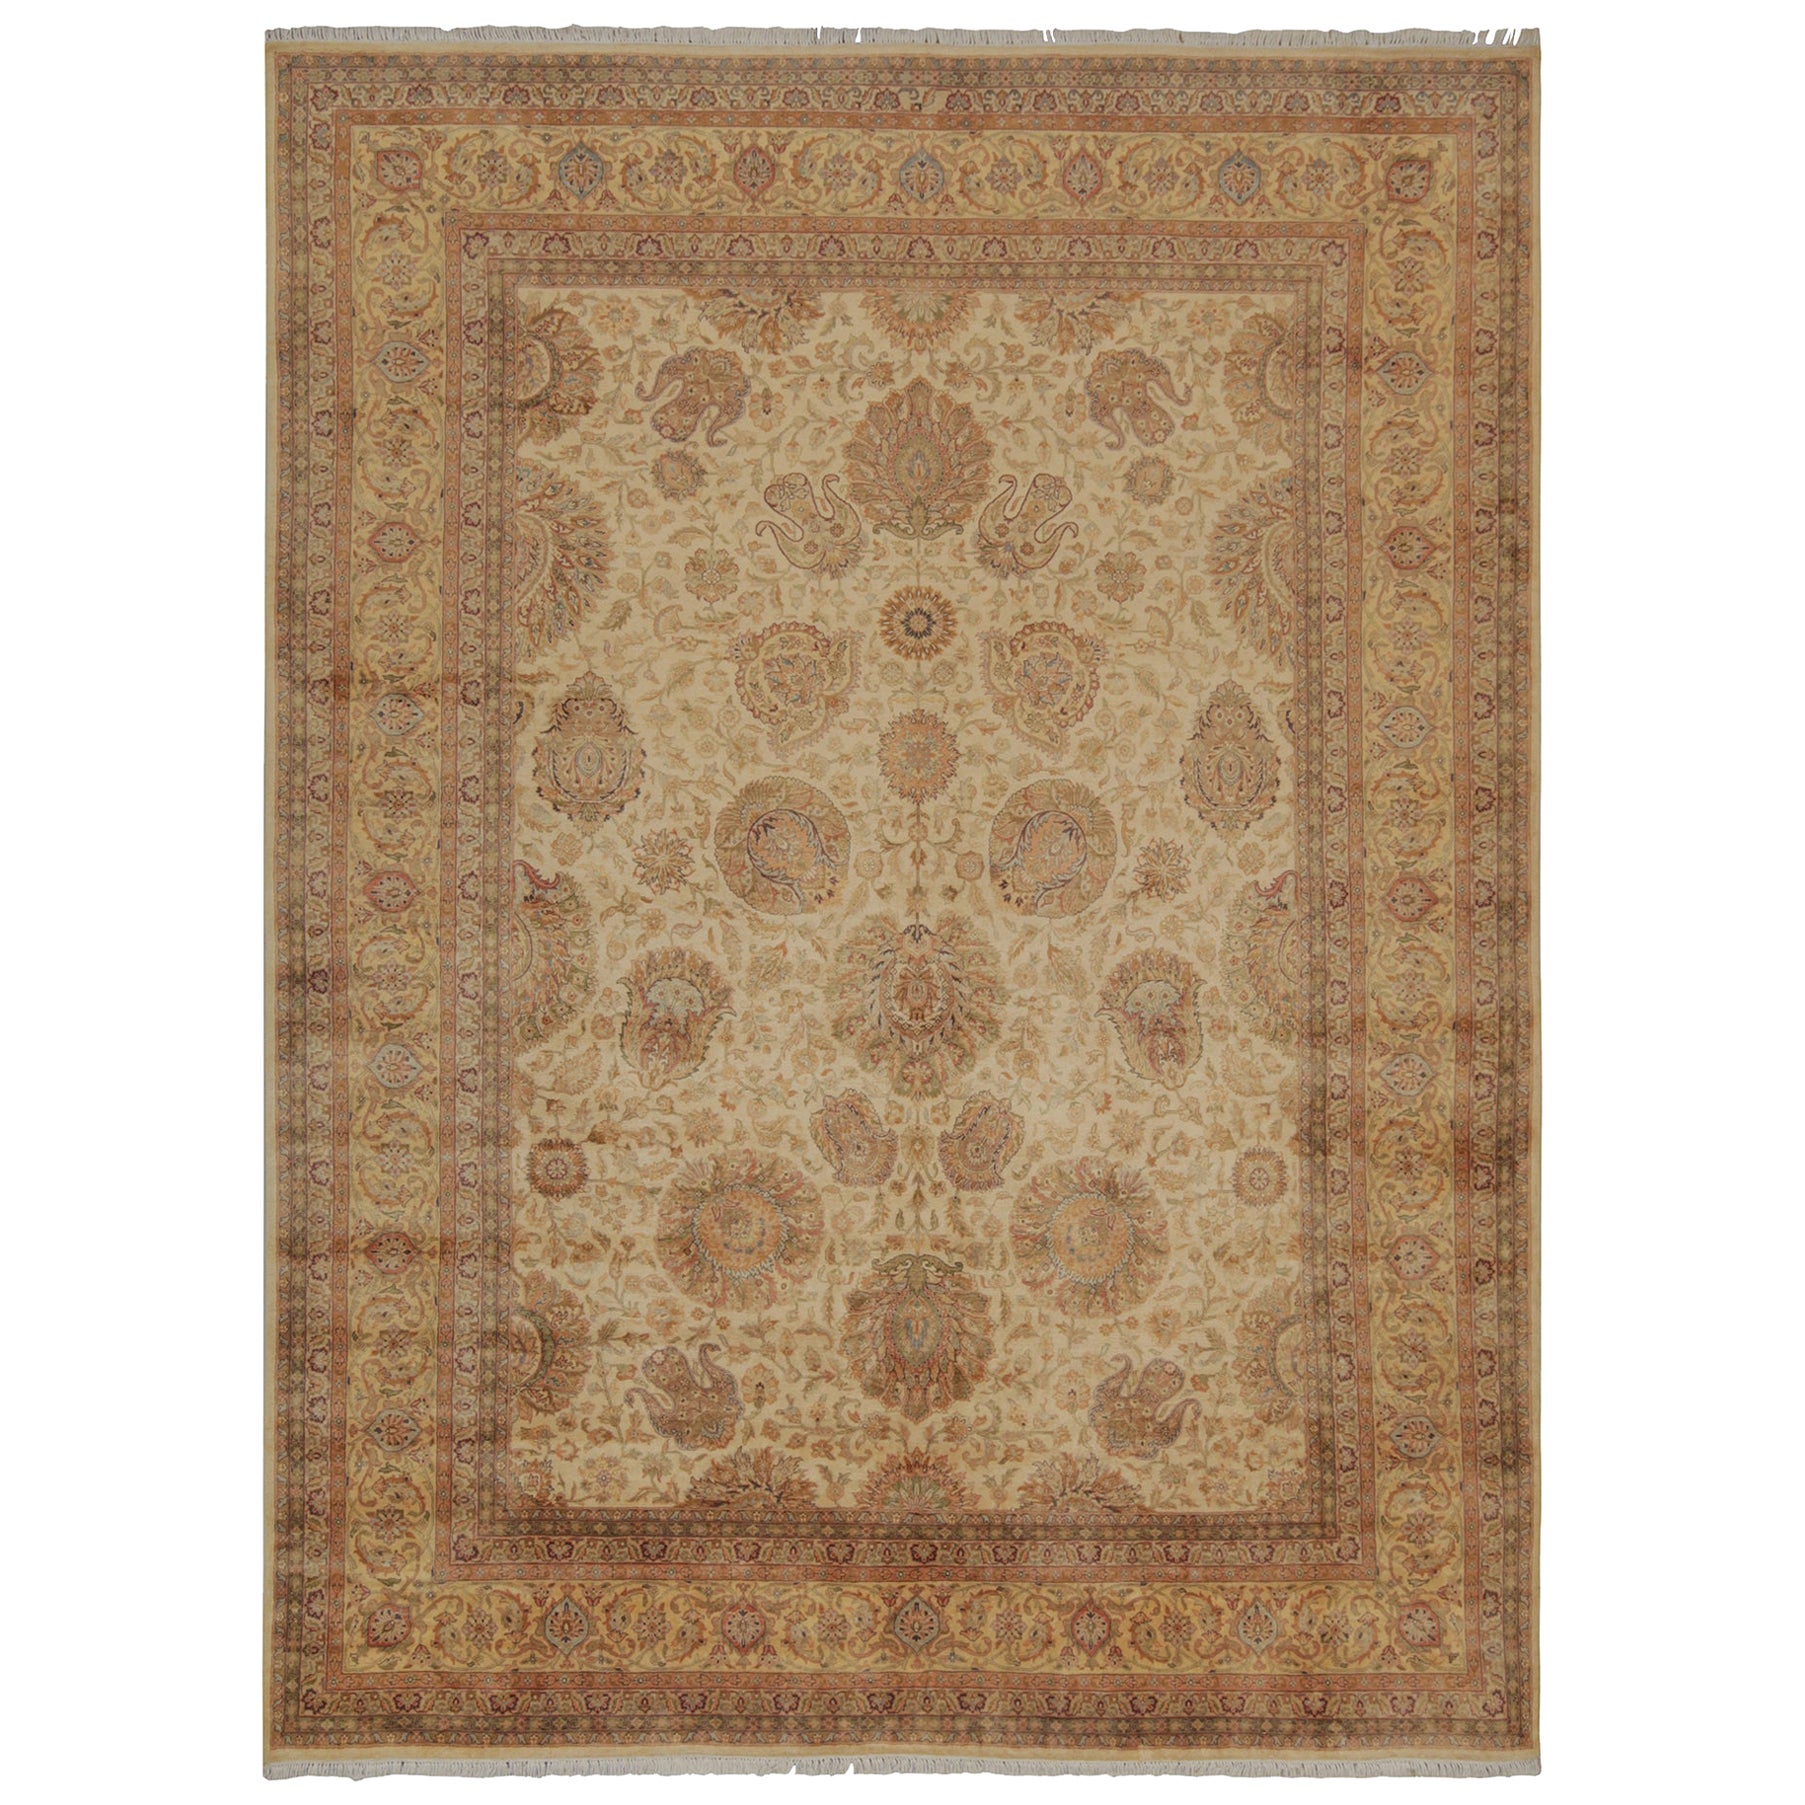 Rug & Kilim’s Persian Style Rug with Gold and Beige-Brown Floral Pattern For Sale